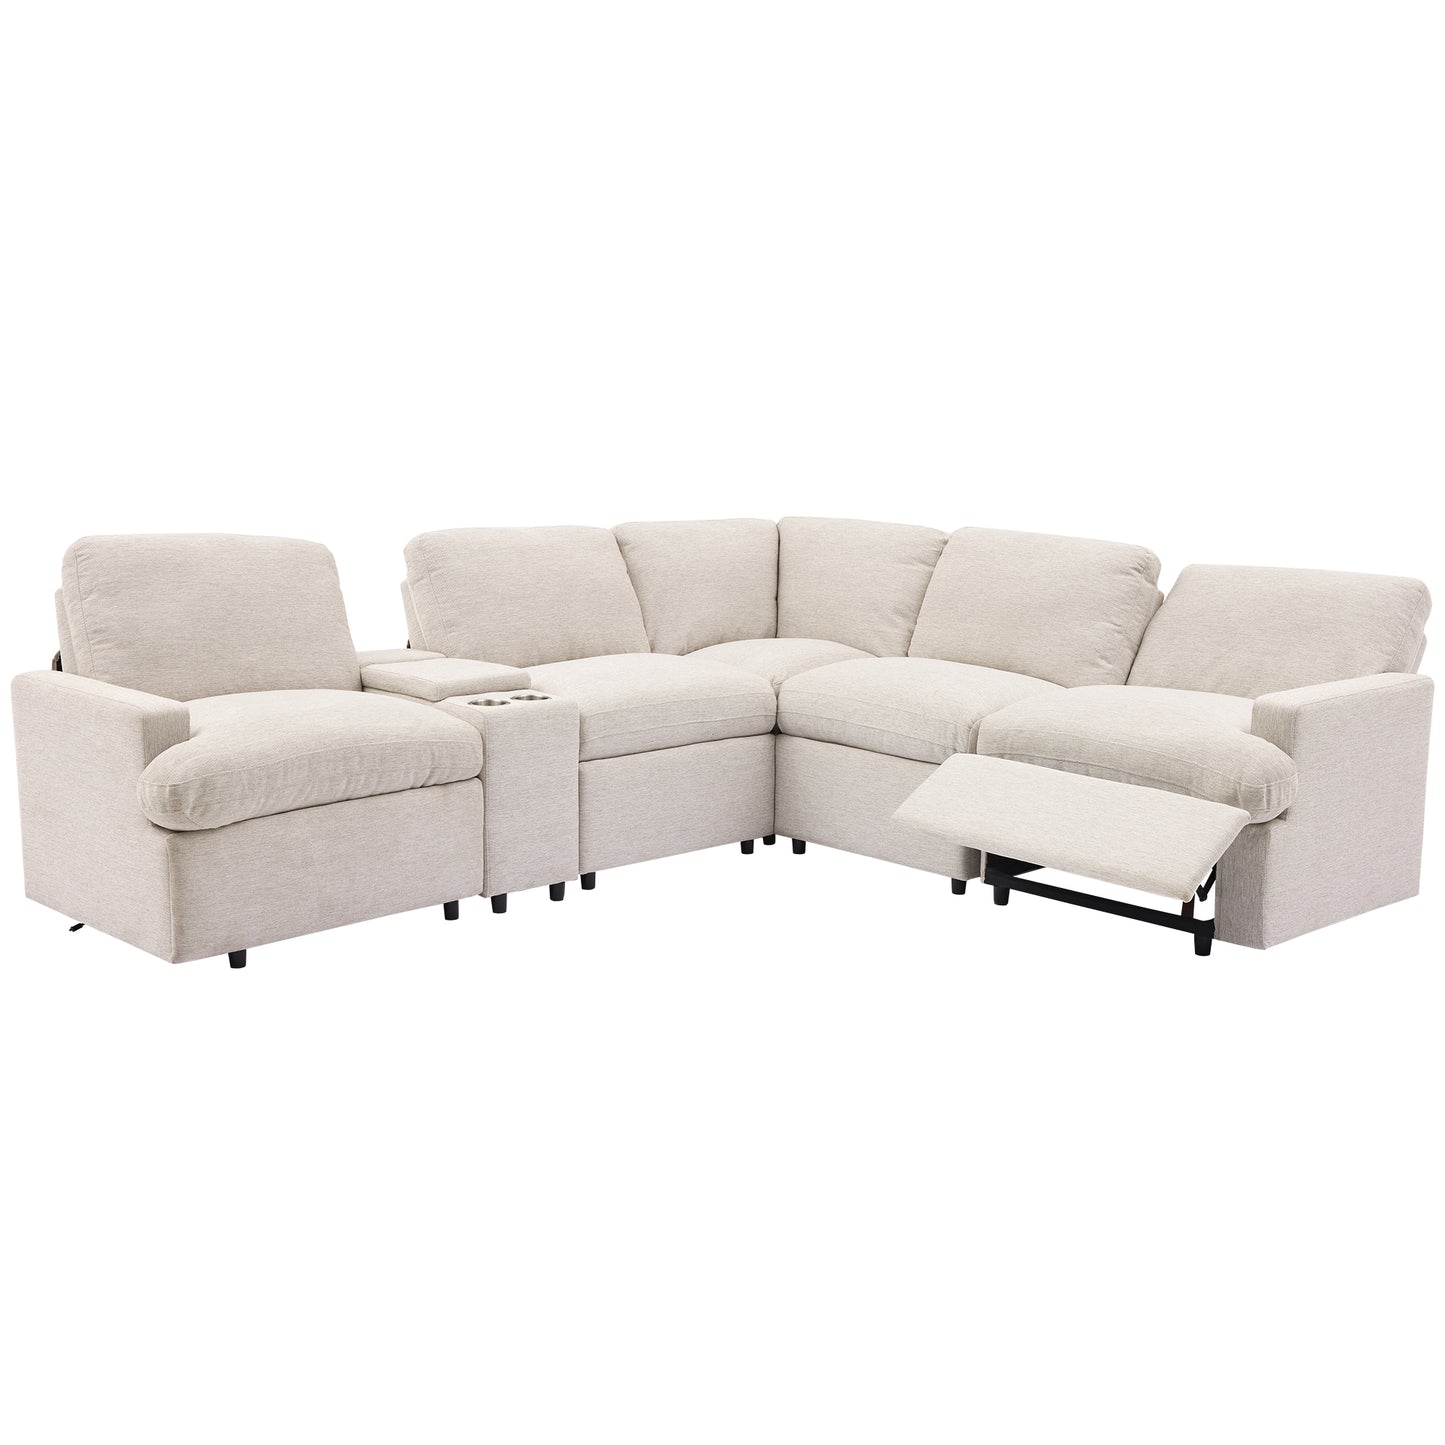 104'' Beige Power Recliner Sectional Sofa with Storage Box, Cup Holders, USB Ports, and Power Socket